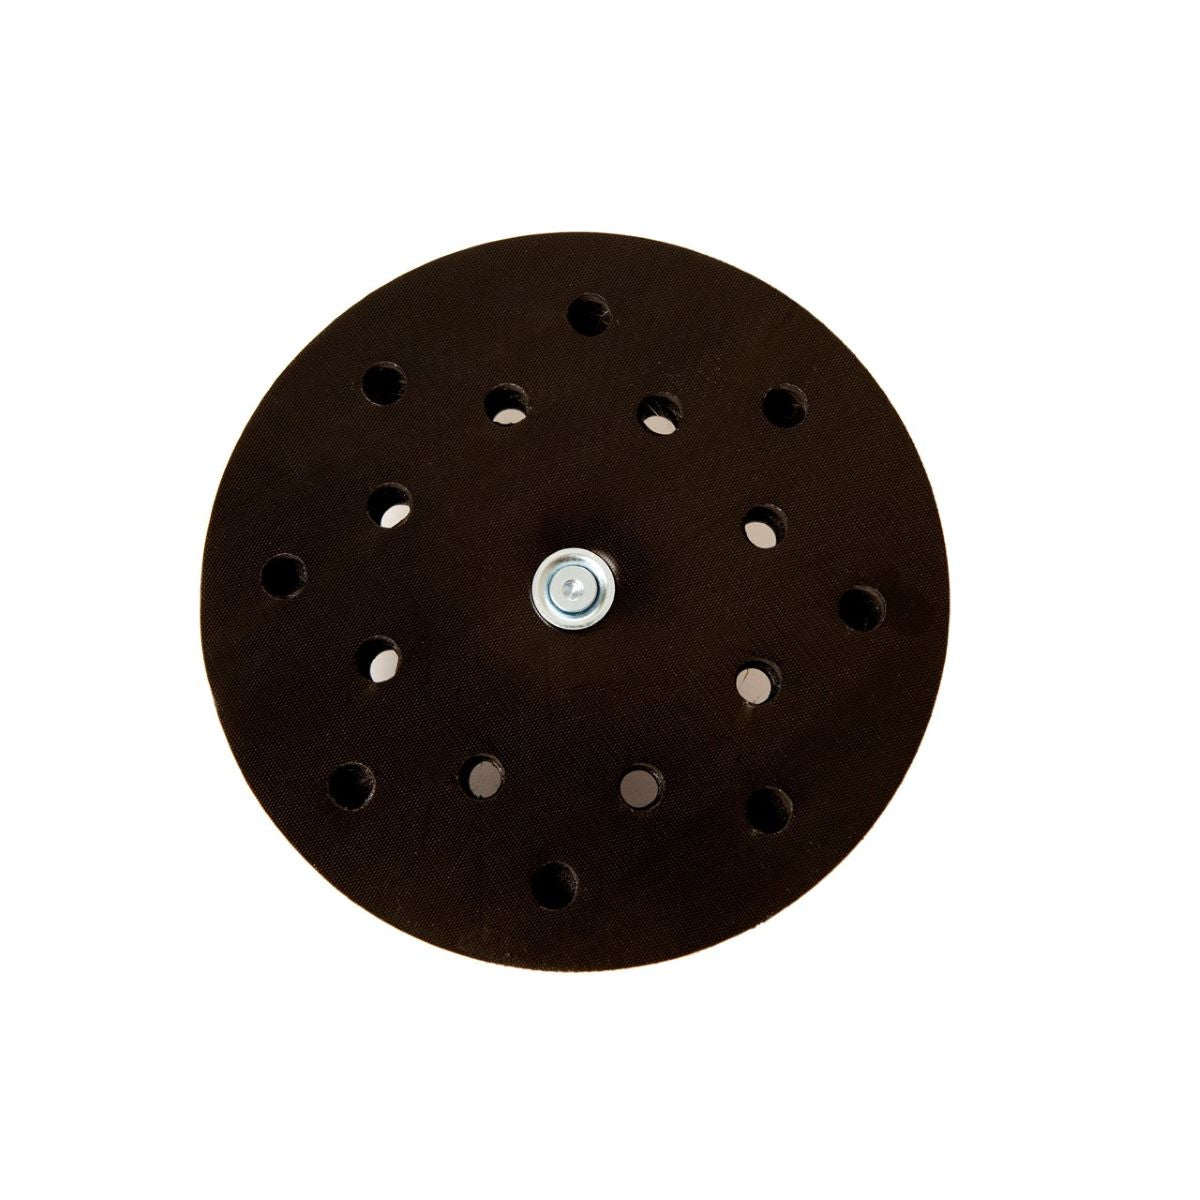 8" 16H (8 Inner & 8 Outer Holes) Black Hook Rotary Pad w/ Center Screw - For Rotary Sander Hook Discs